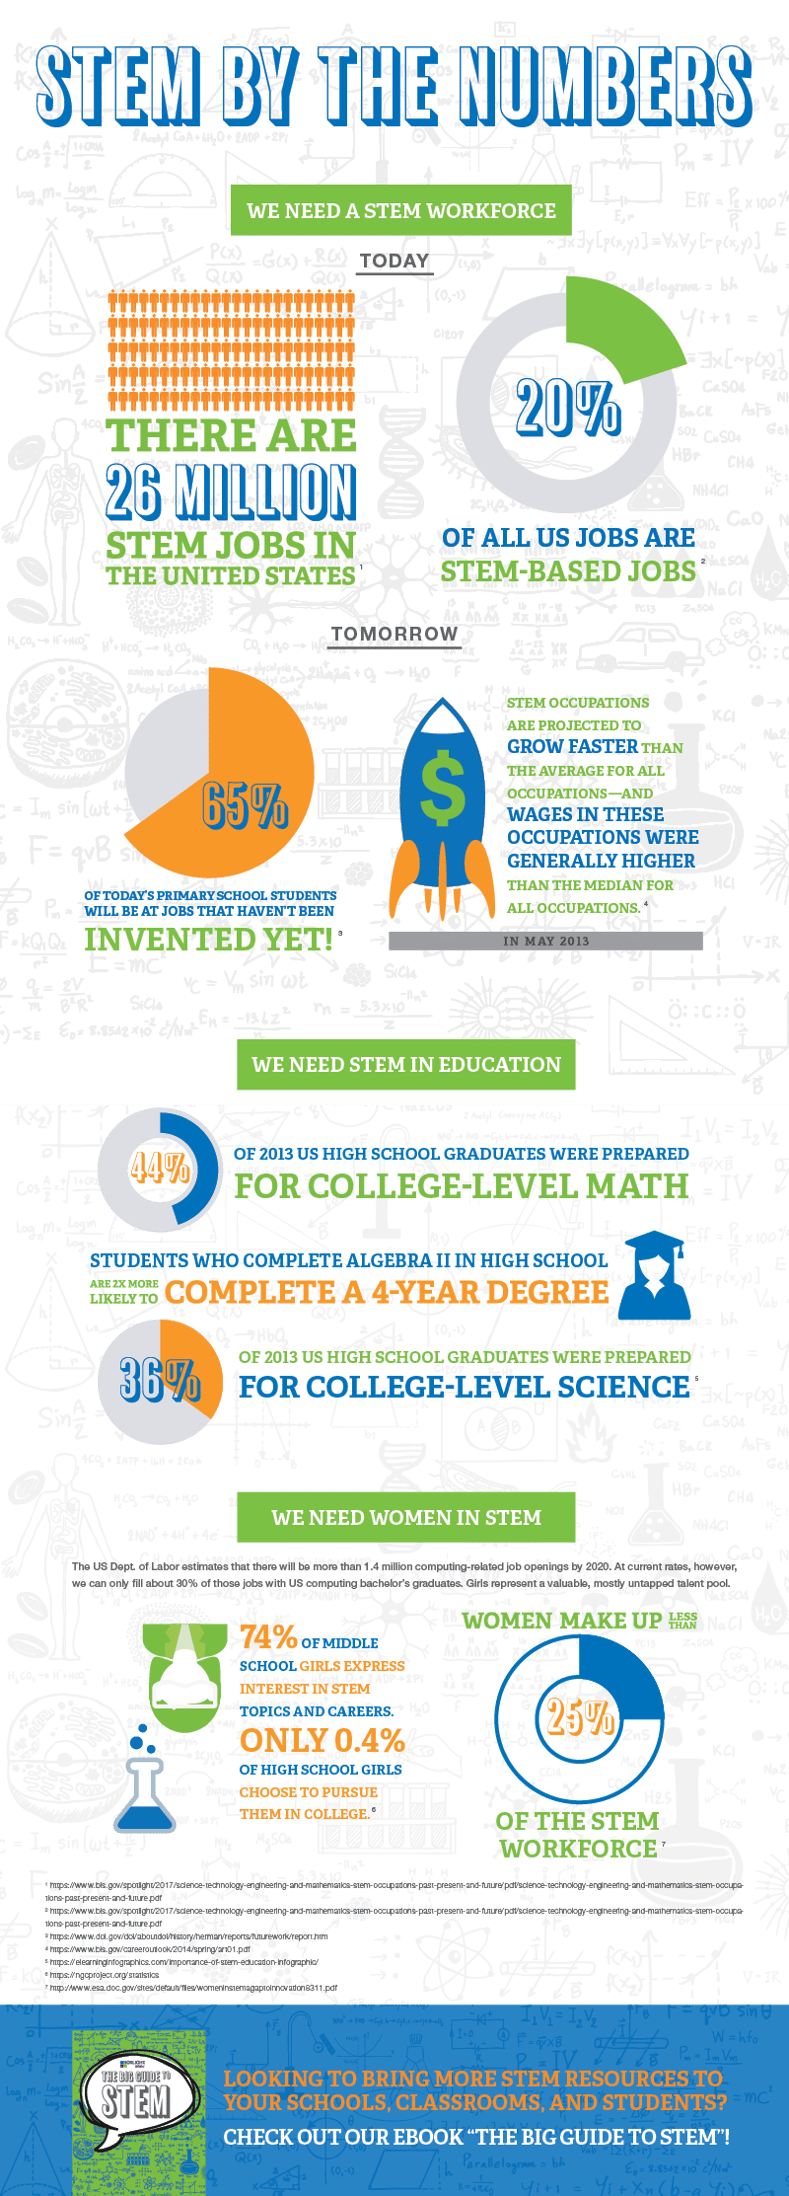 STEM_STATS_Infographic.png